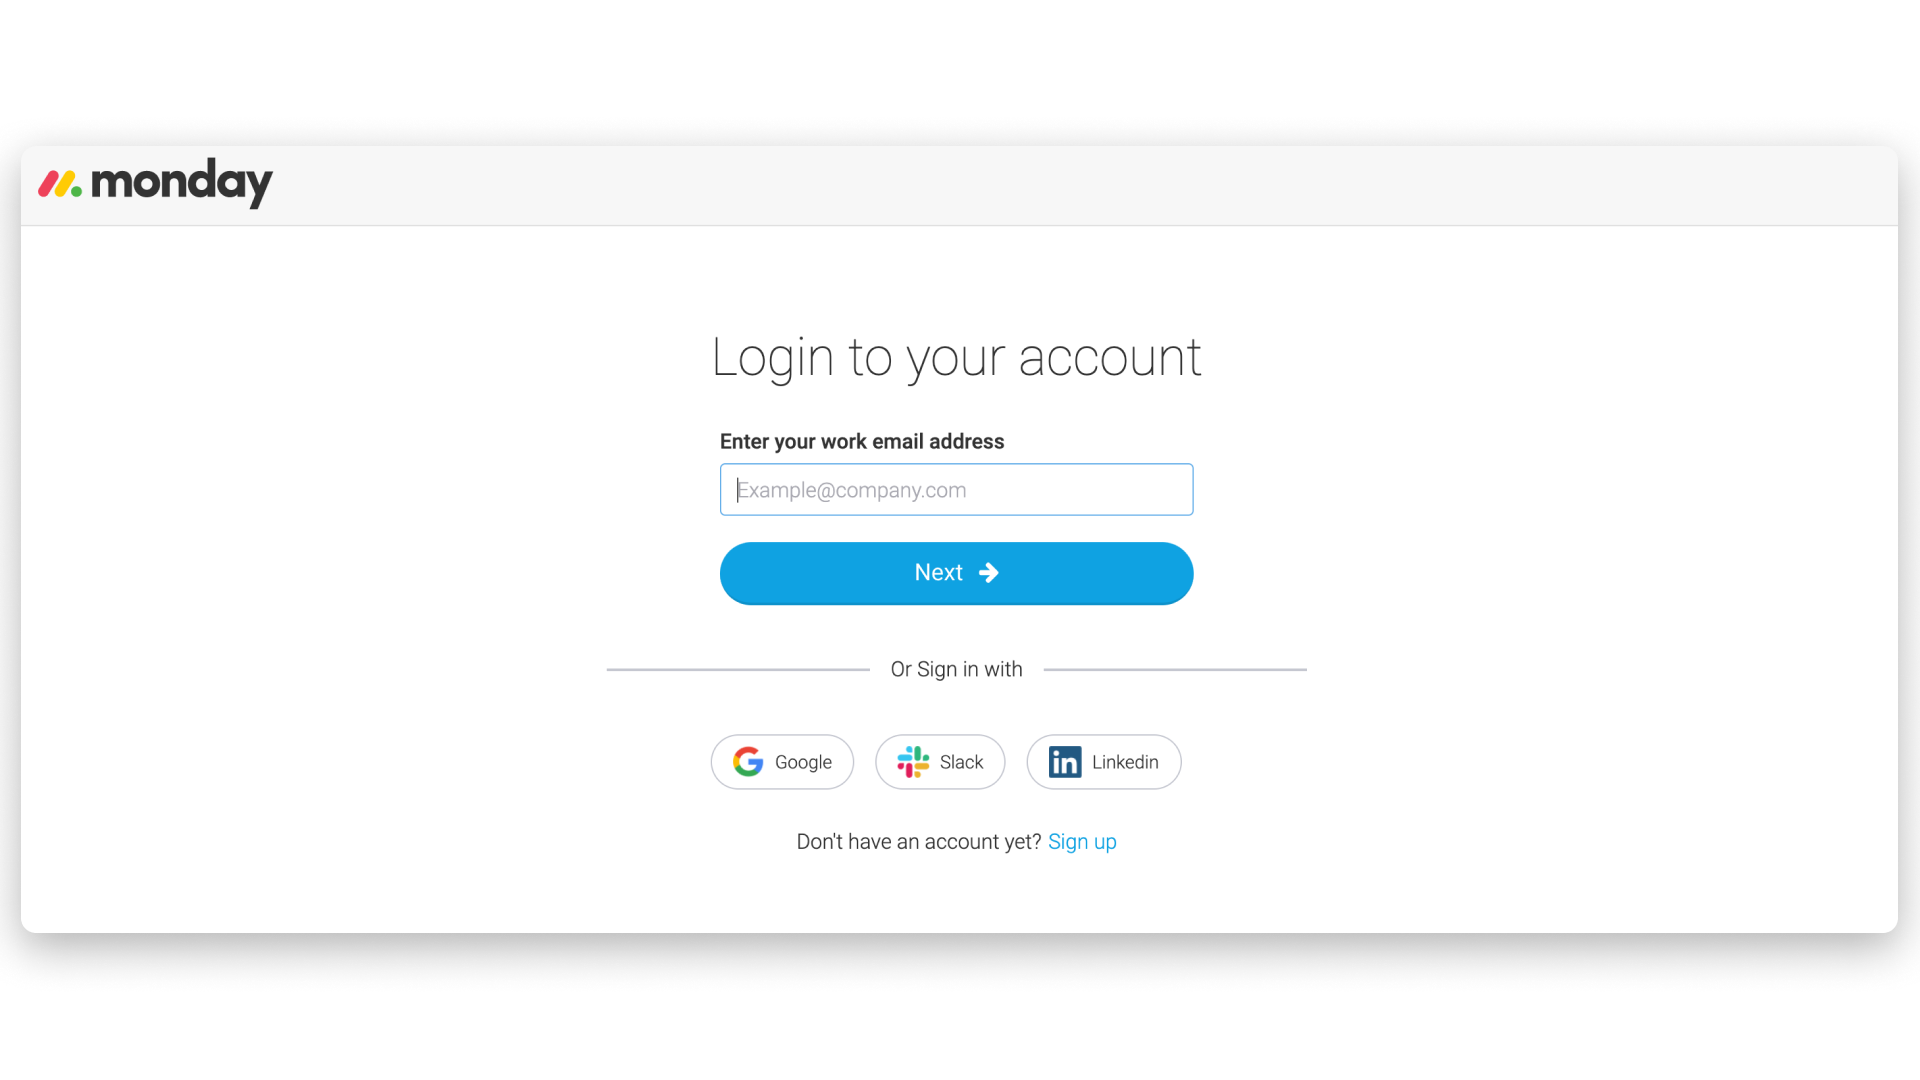 How do I log into my account? – Support